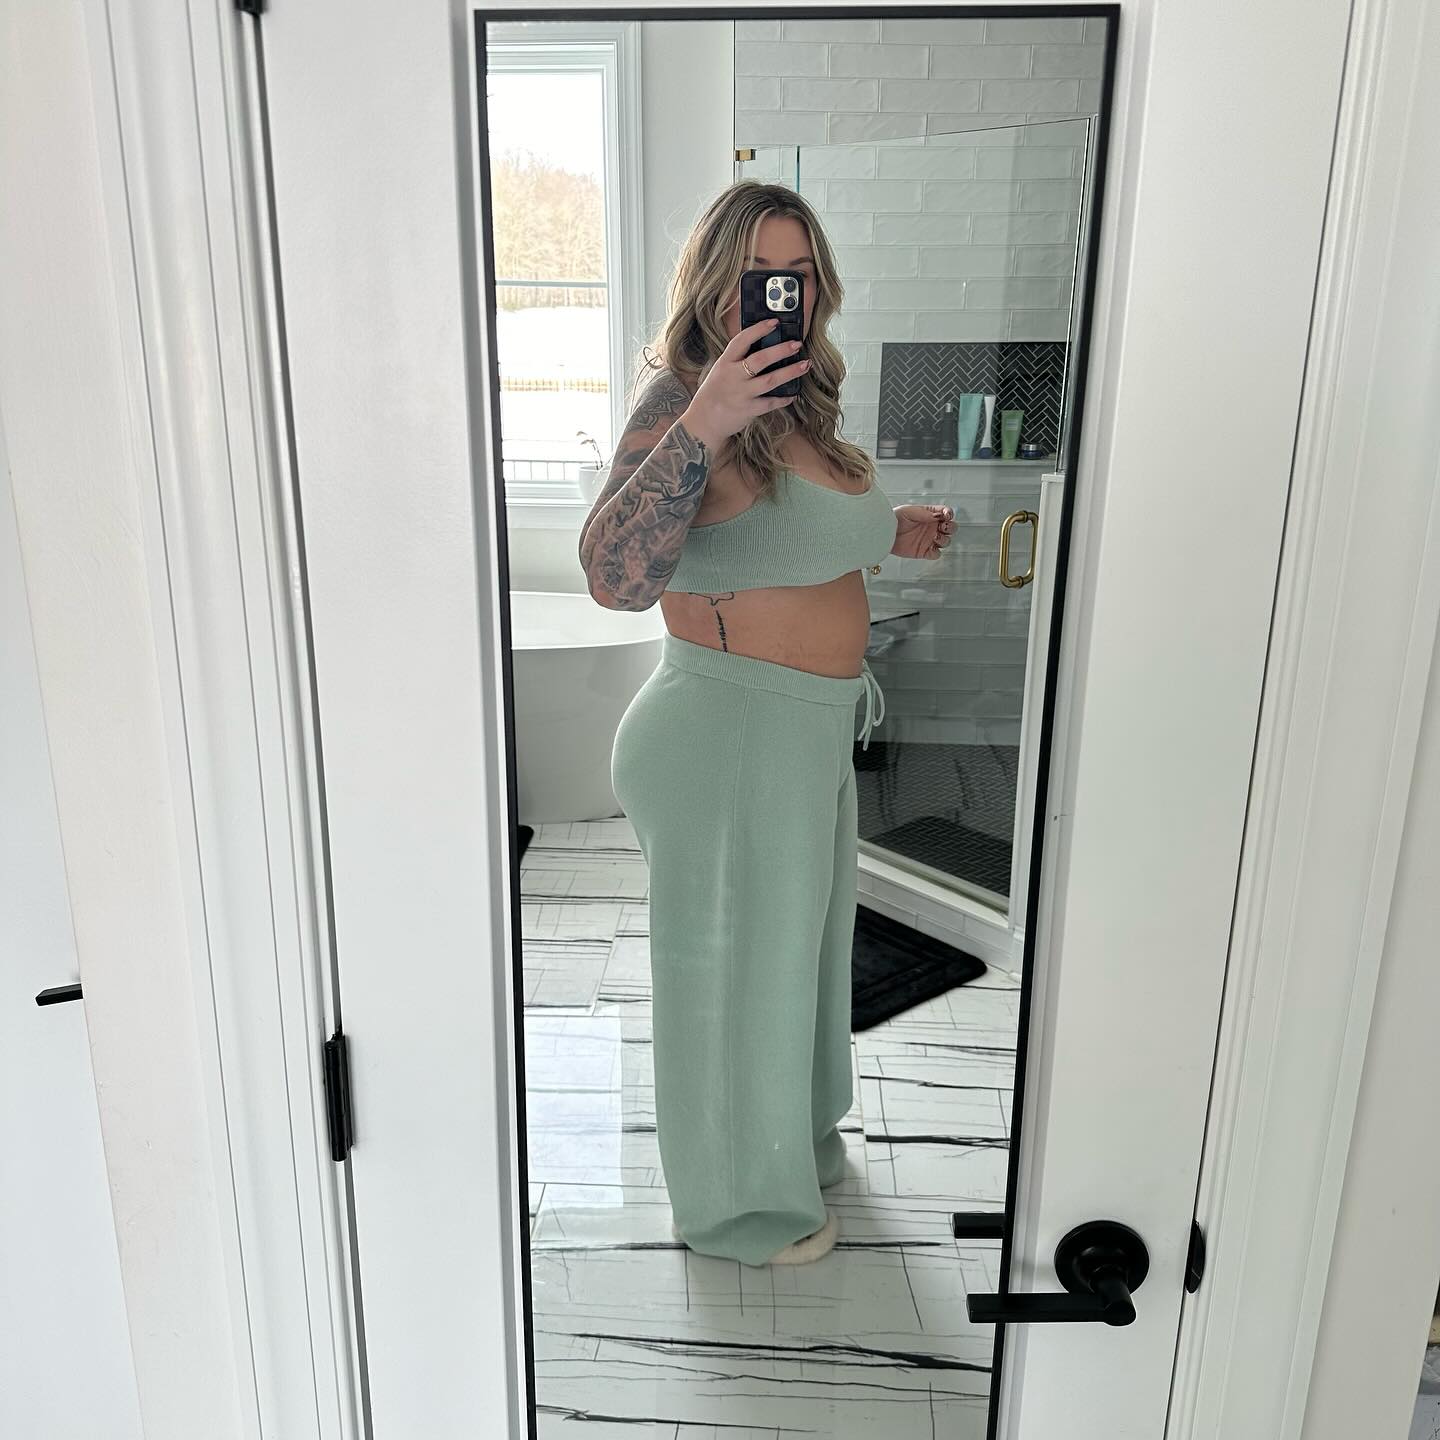 The former Teen Mom took to her Instagram account on Tuesday to showcase her 'favorite post-partum loungewear'